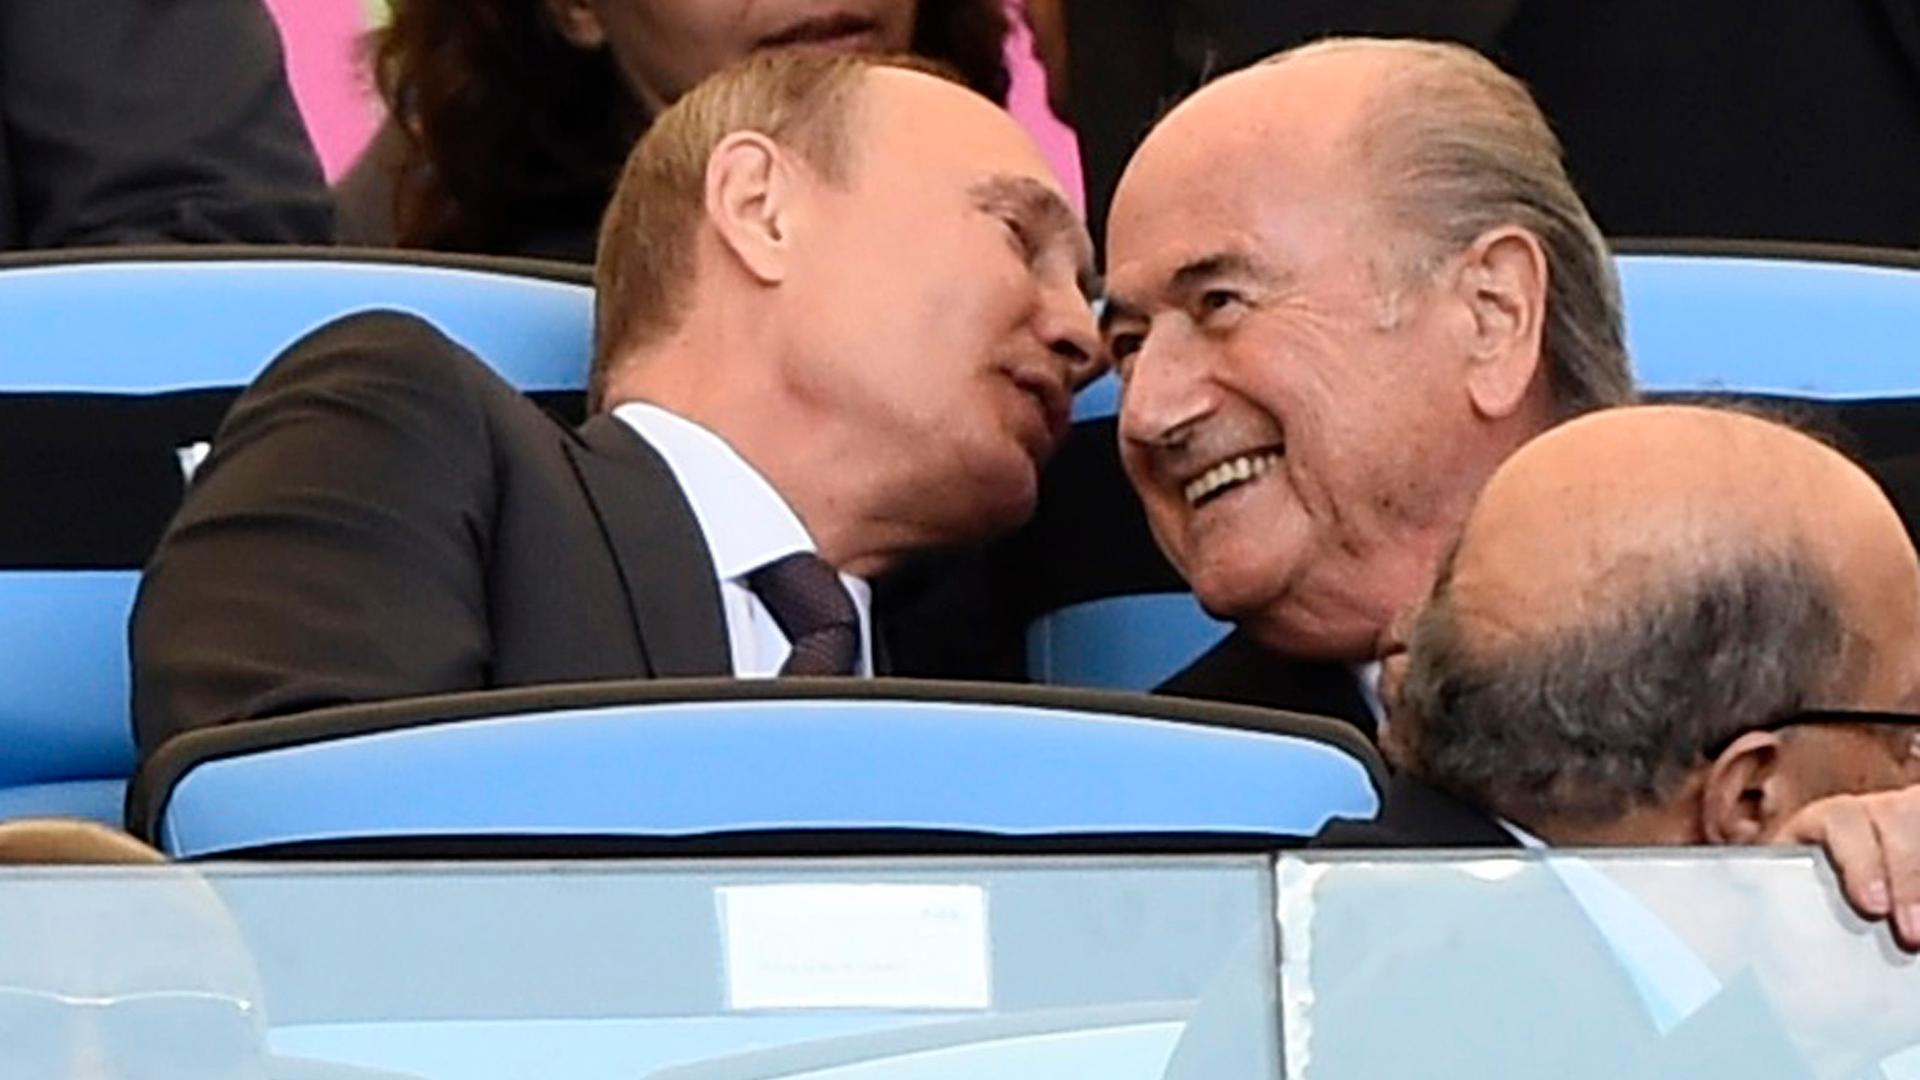 Russian President Vladimir Putin, pictured above with FIFA President Sepp Blatter, was among the guests at the World Cup final in Brazil on Sunday. Putin was attending because Russia will host the next tournament in 2018. 